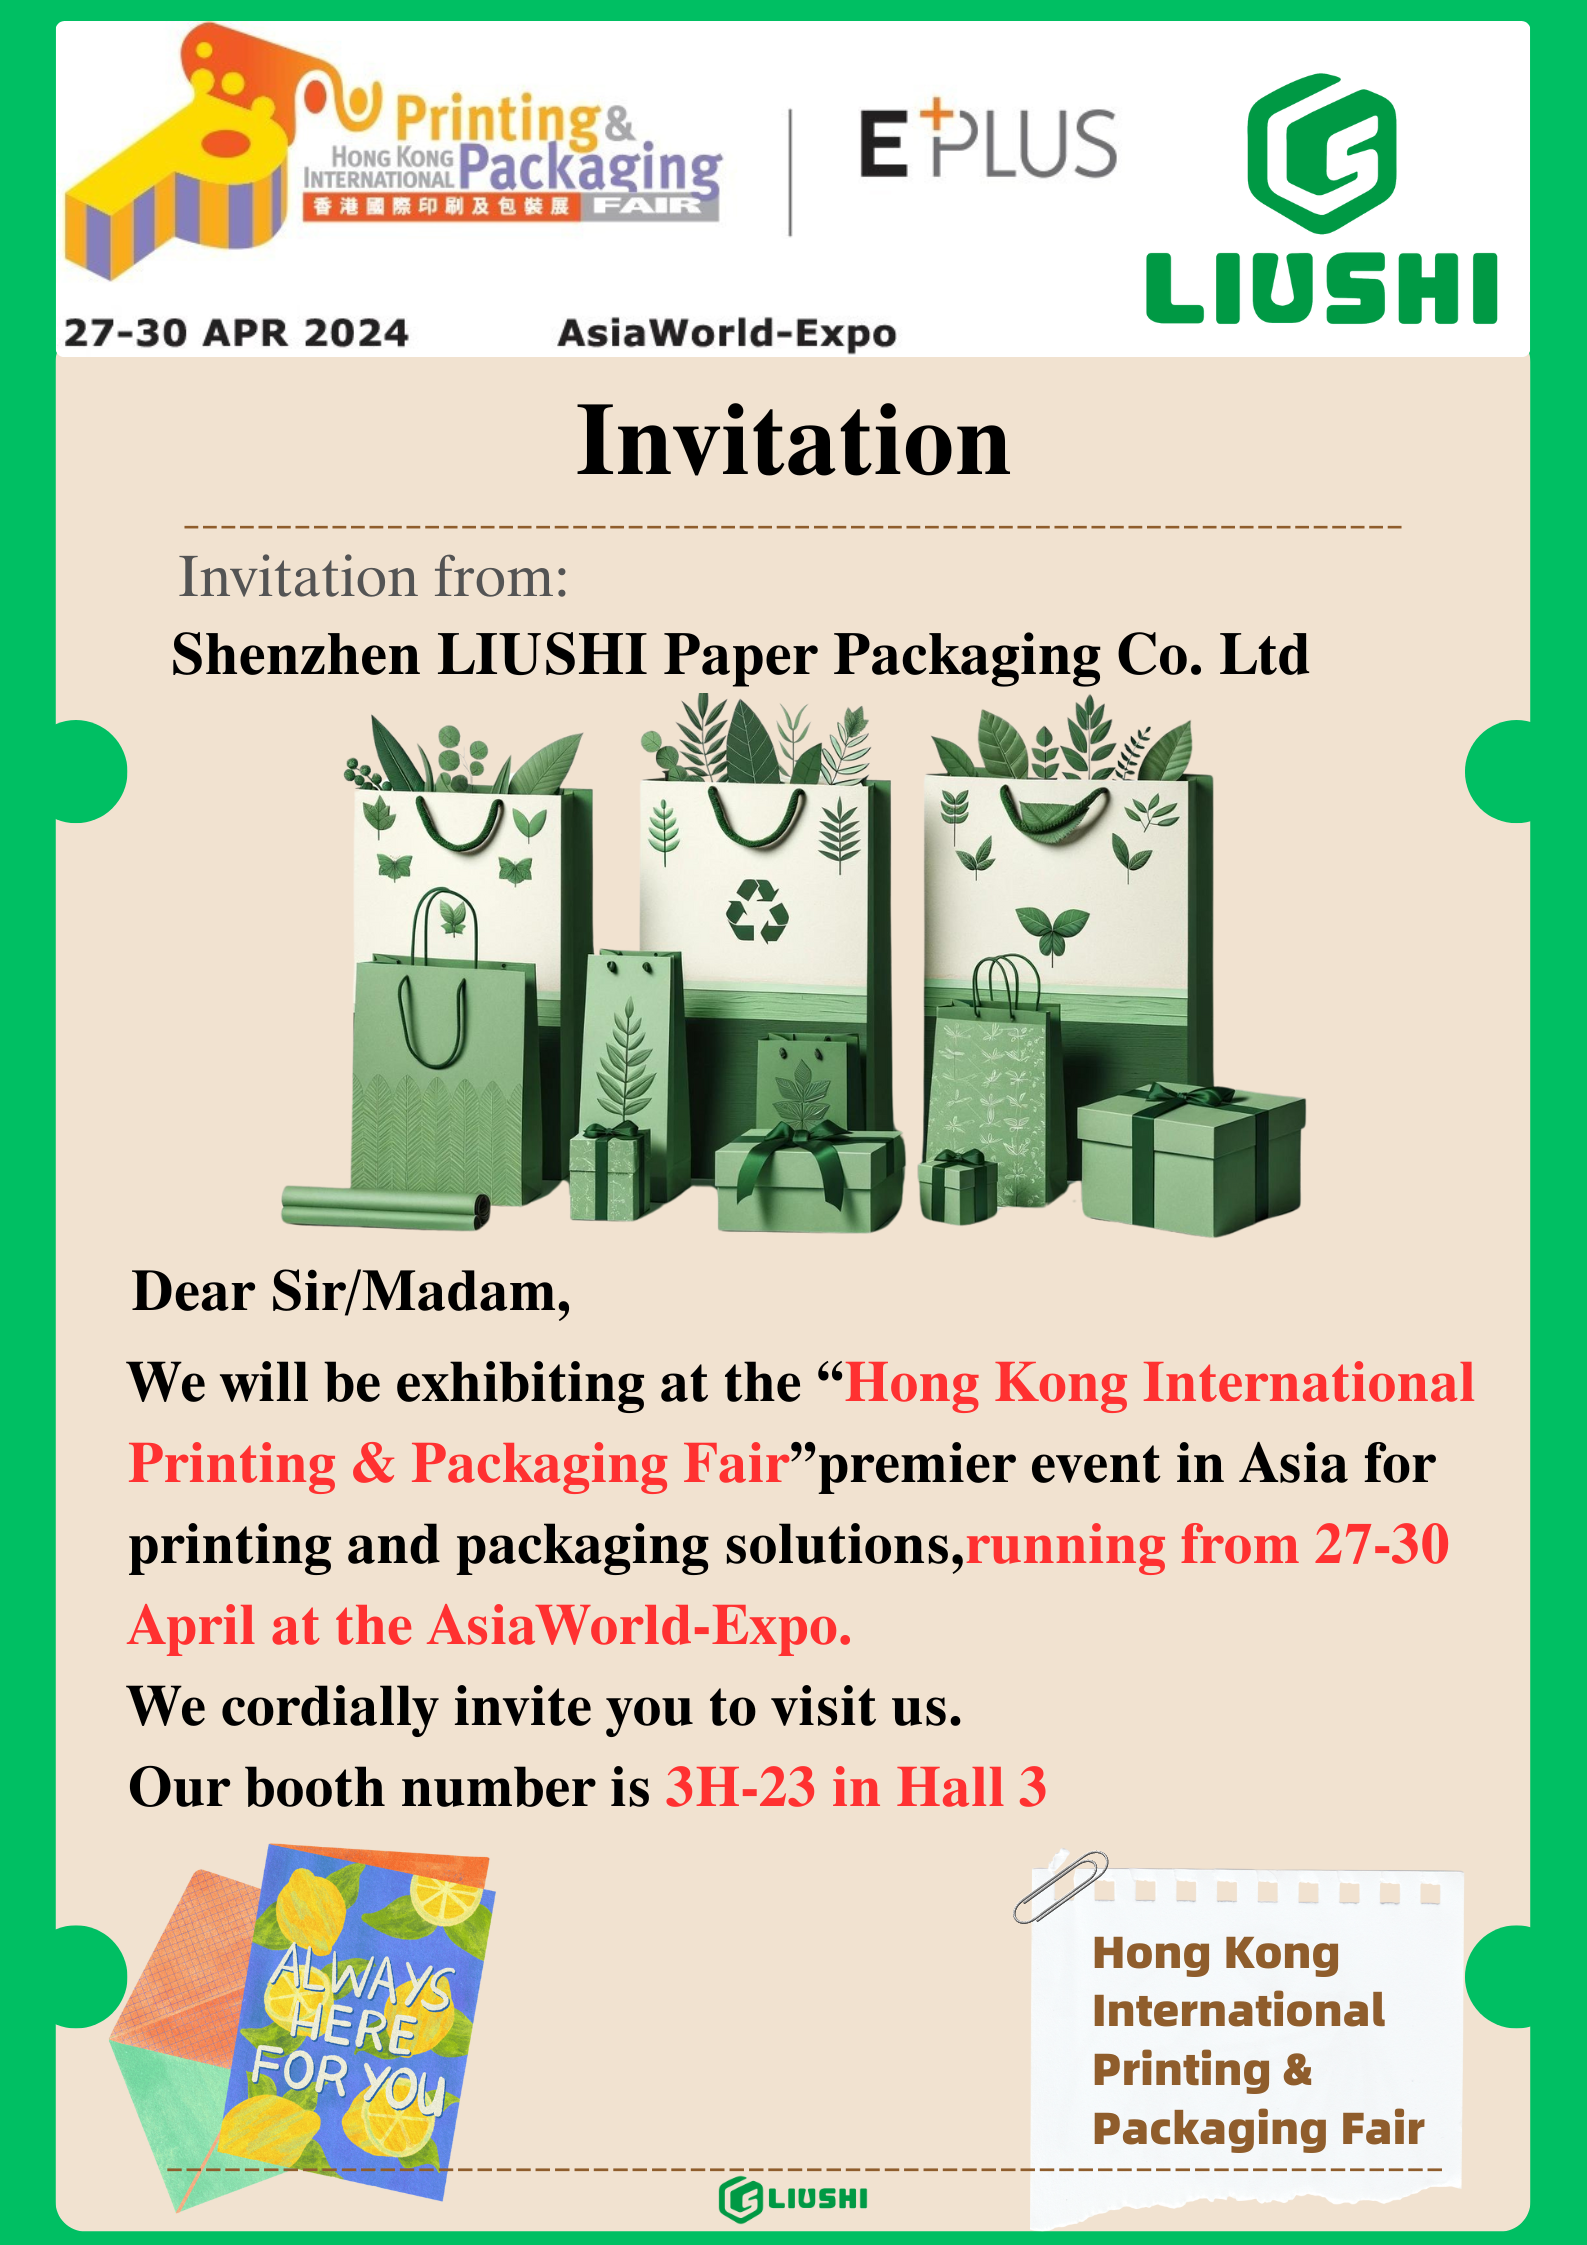 The latest information about company exhibitions